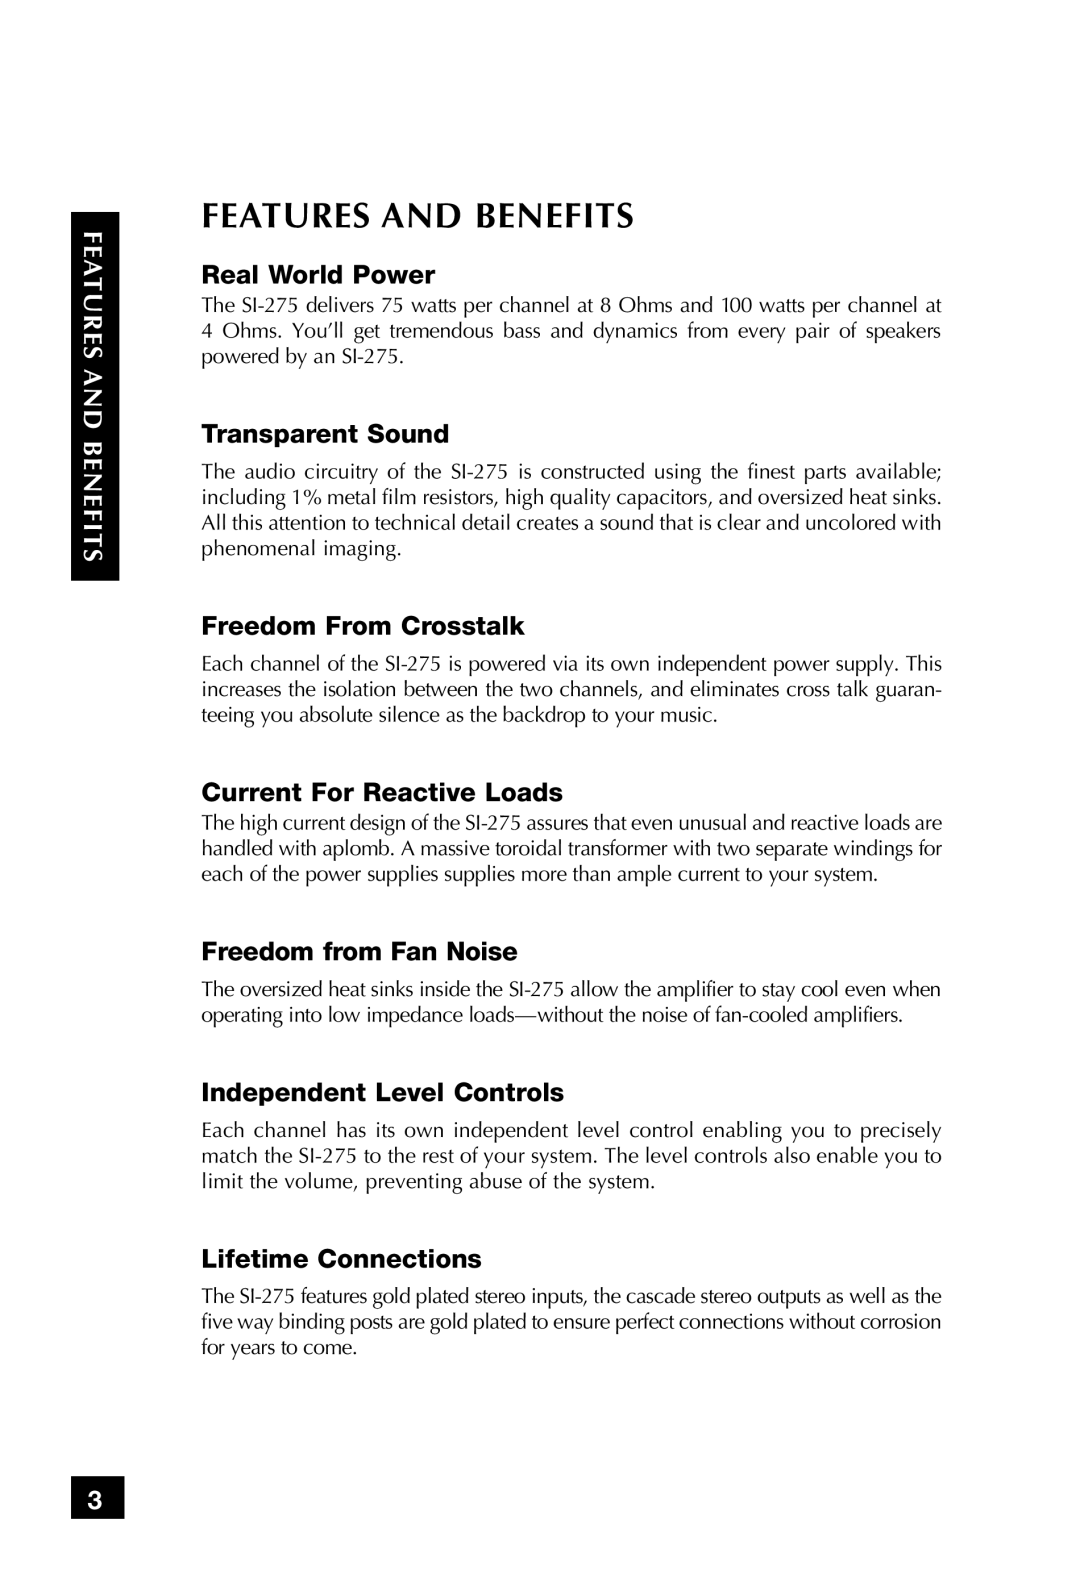 Niles Audio SI-275 manual Features And Benefits, Real World Power, Transparent Sound, Freedom From Crosstalk 